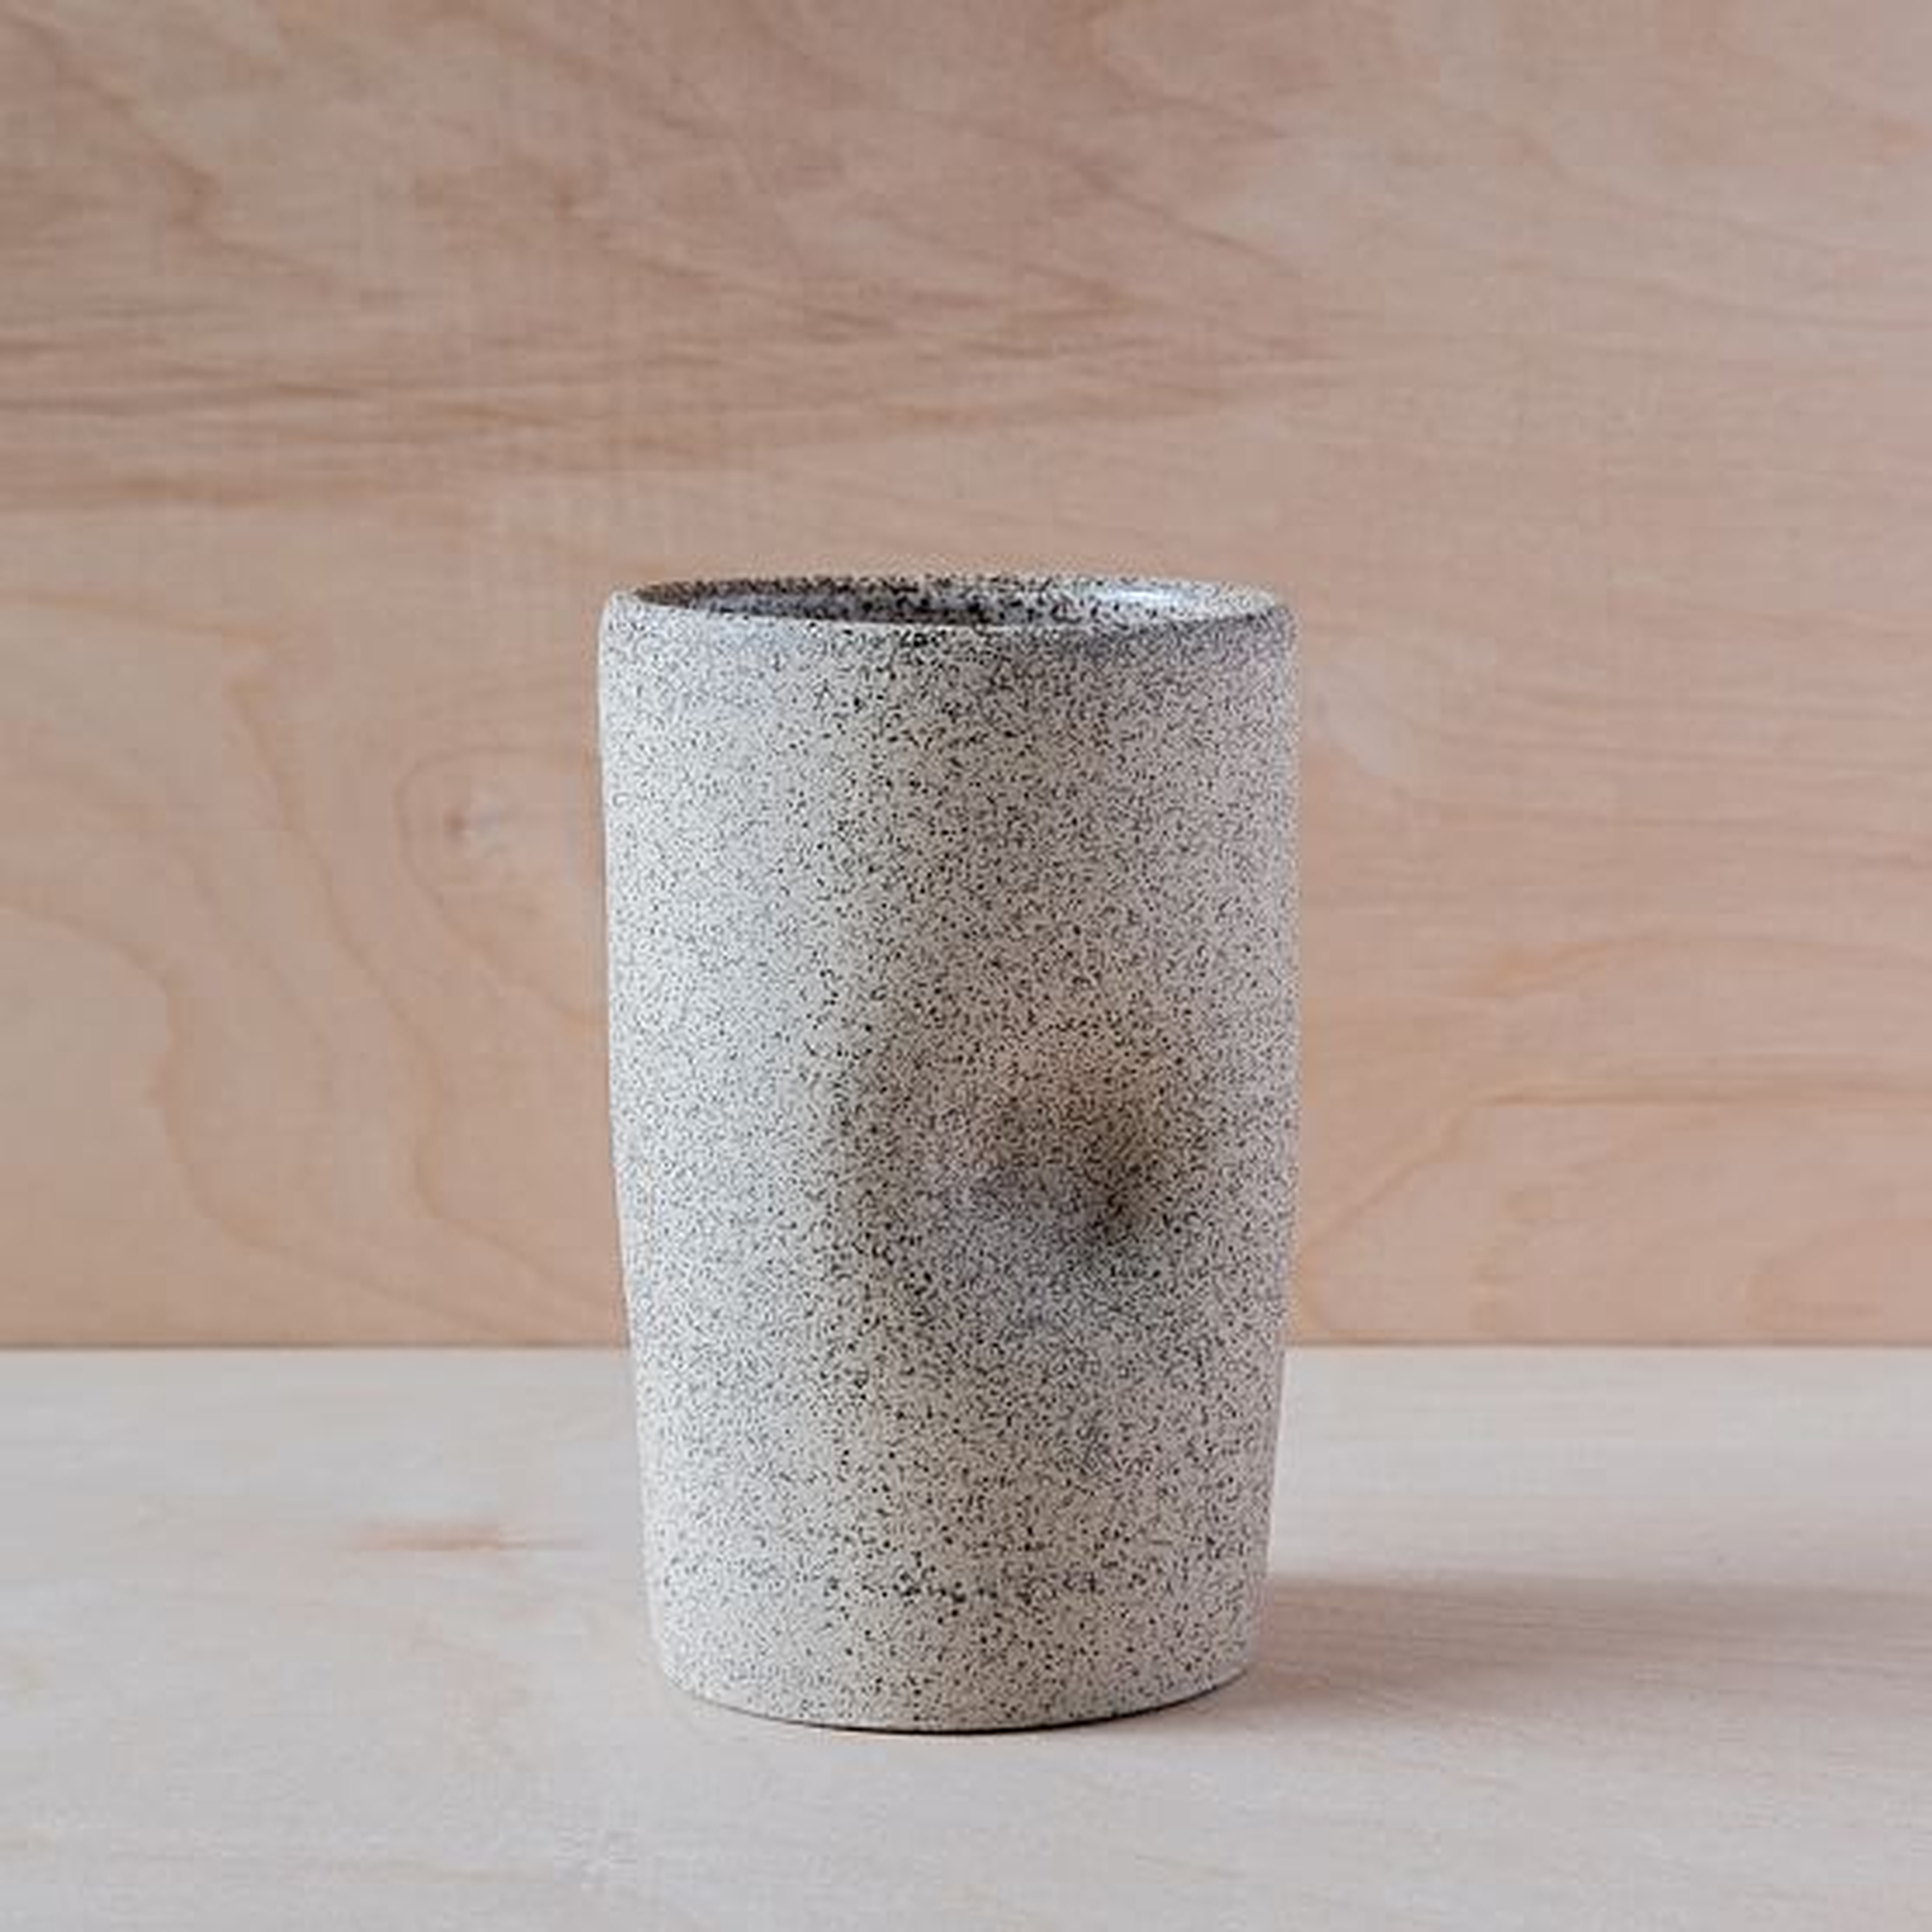 Utility Objects Tumbler, Dimple, Natural Sand - West Elm